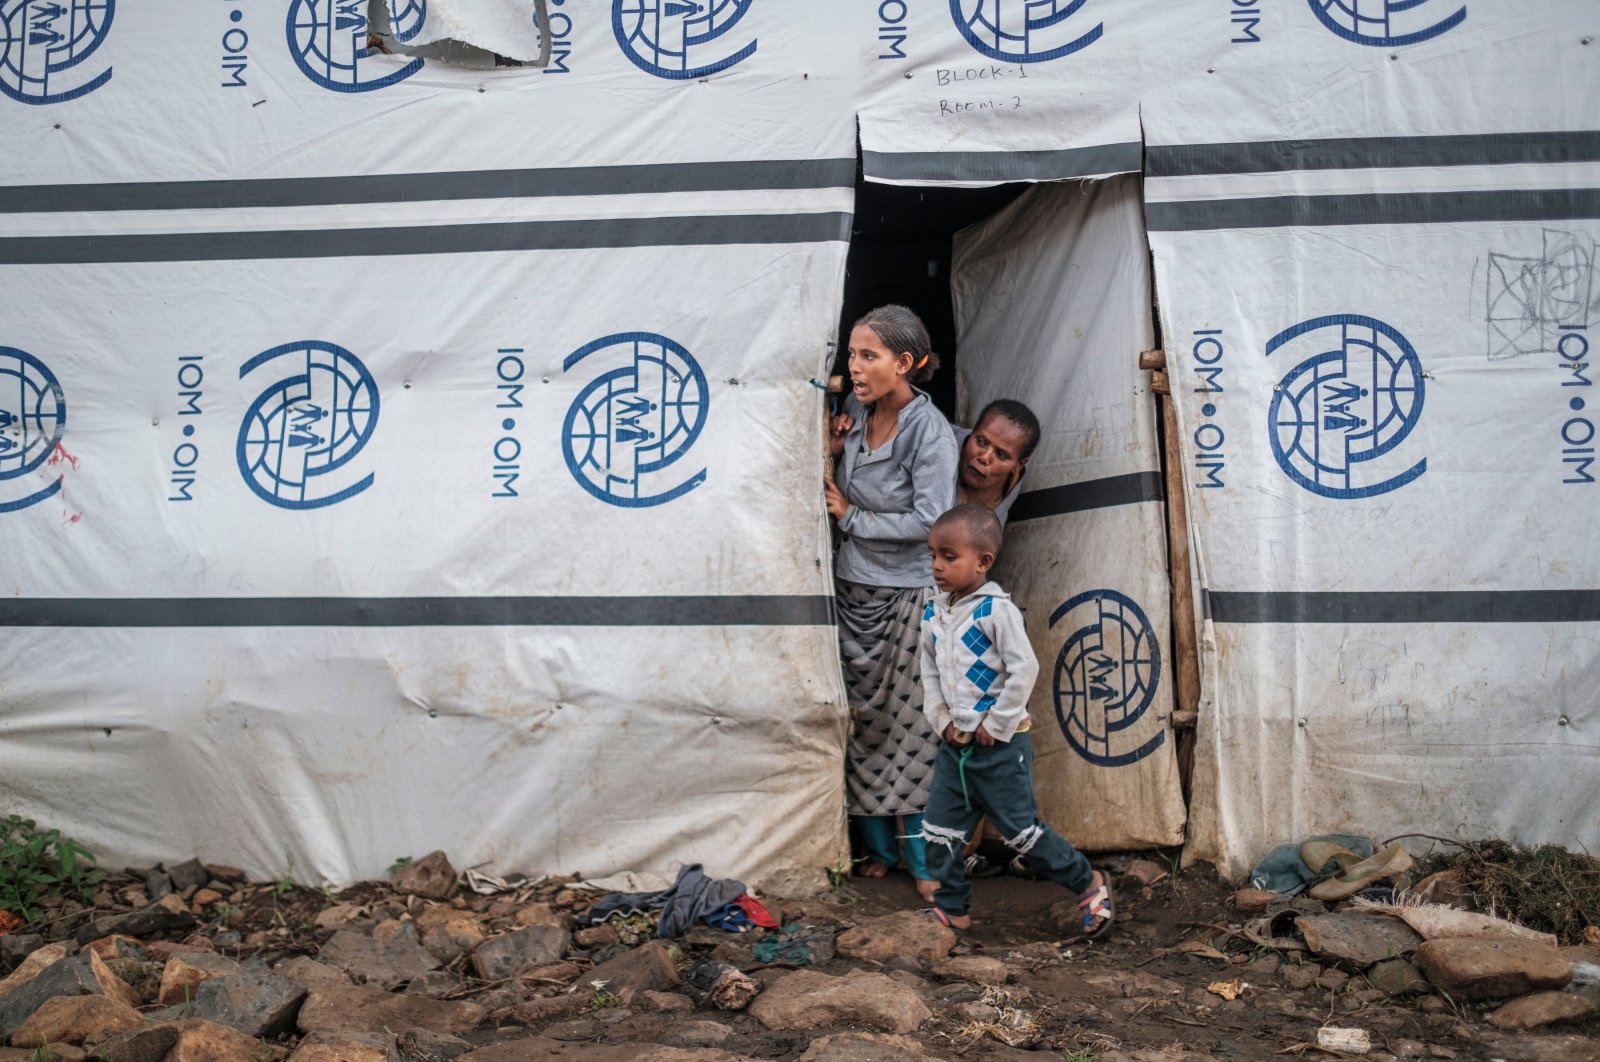 Internally displaced people stand at the door of a shelter at a camp in Azezo, Ethiopia, July 12, 2021. (AFP Photo)